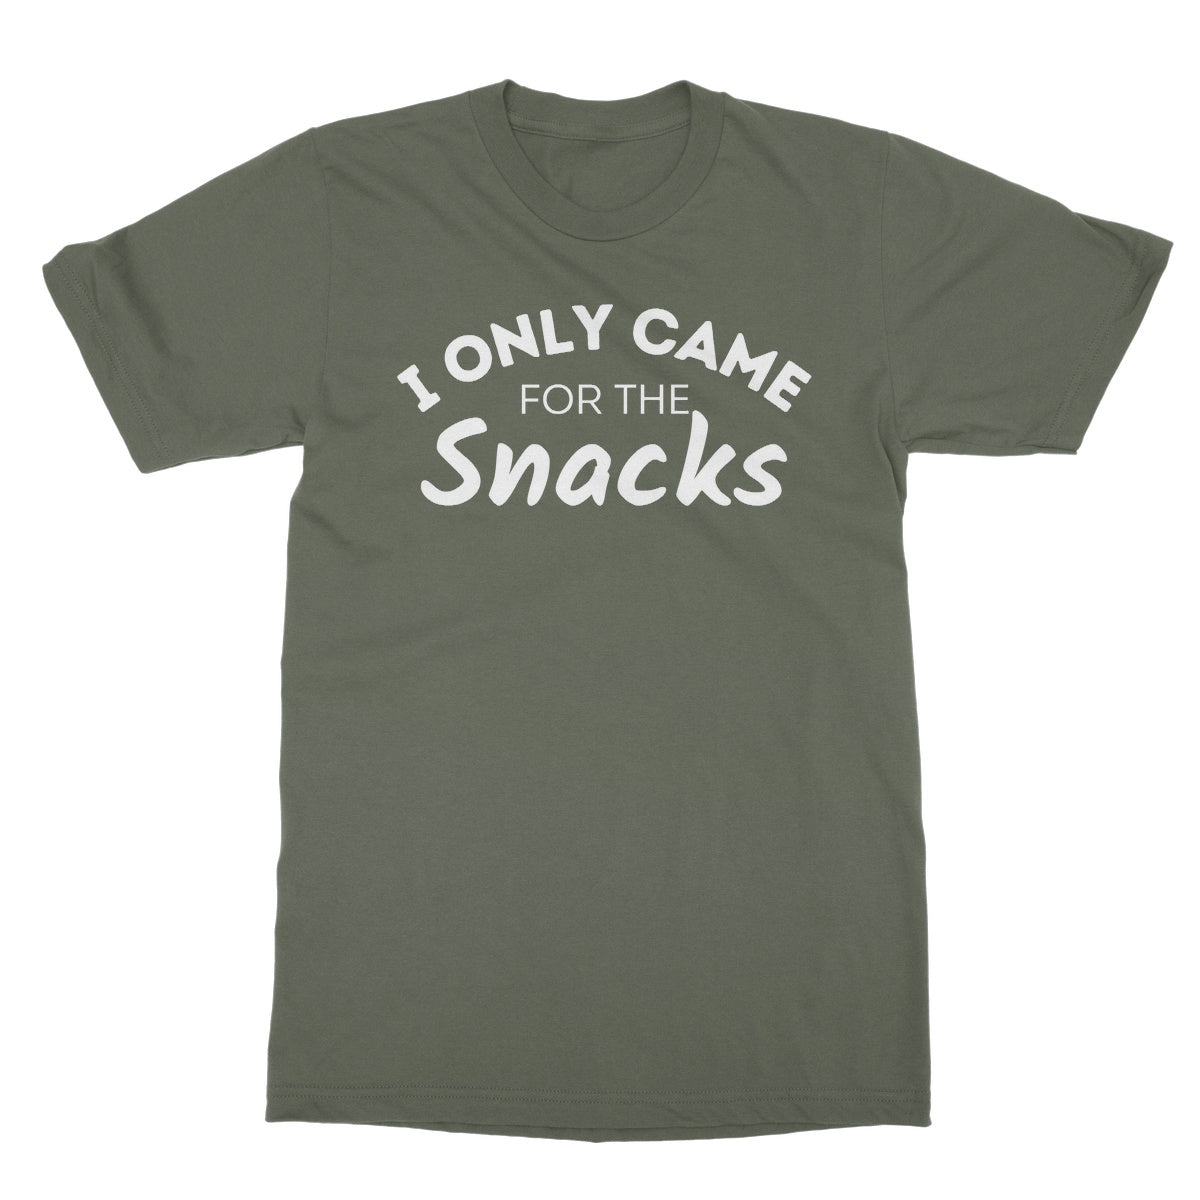 I only came for the snacks t shirt green